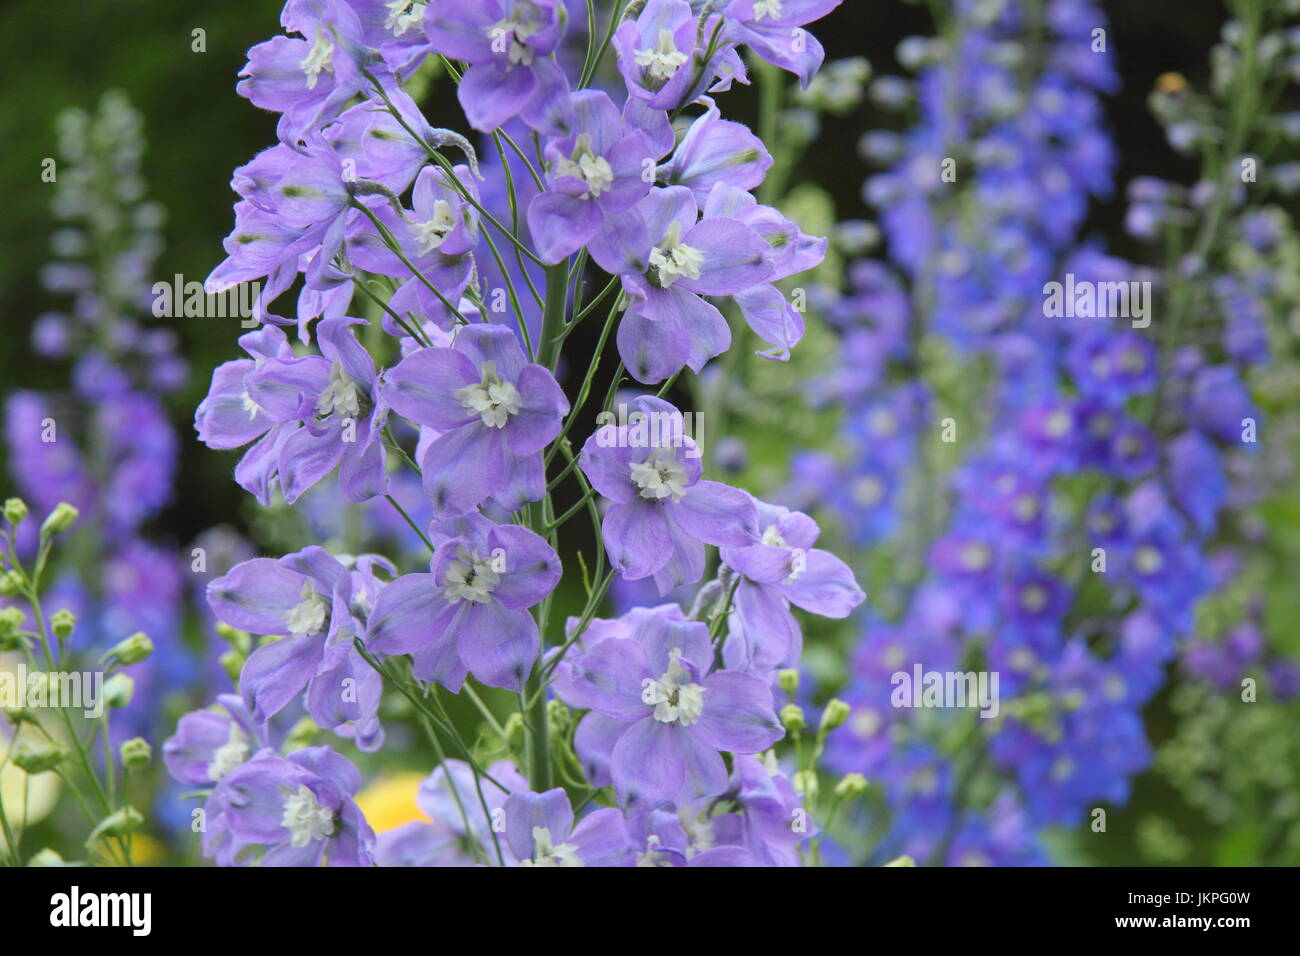 RHS Award of Garden Merit lilac blue delphiniums in full bloom in the herbaceous border of an English garden in summer (June) Stock Photo